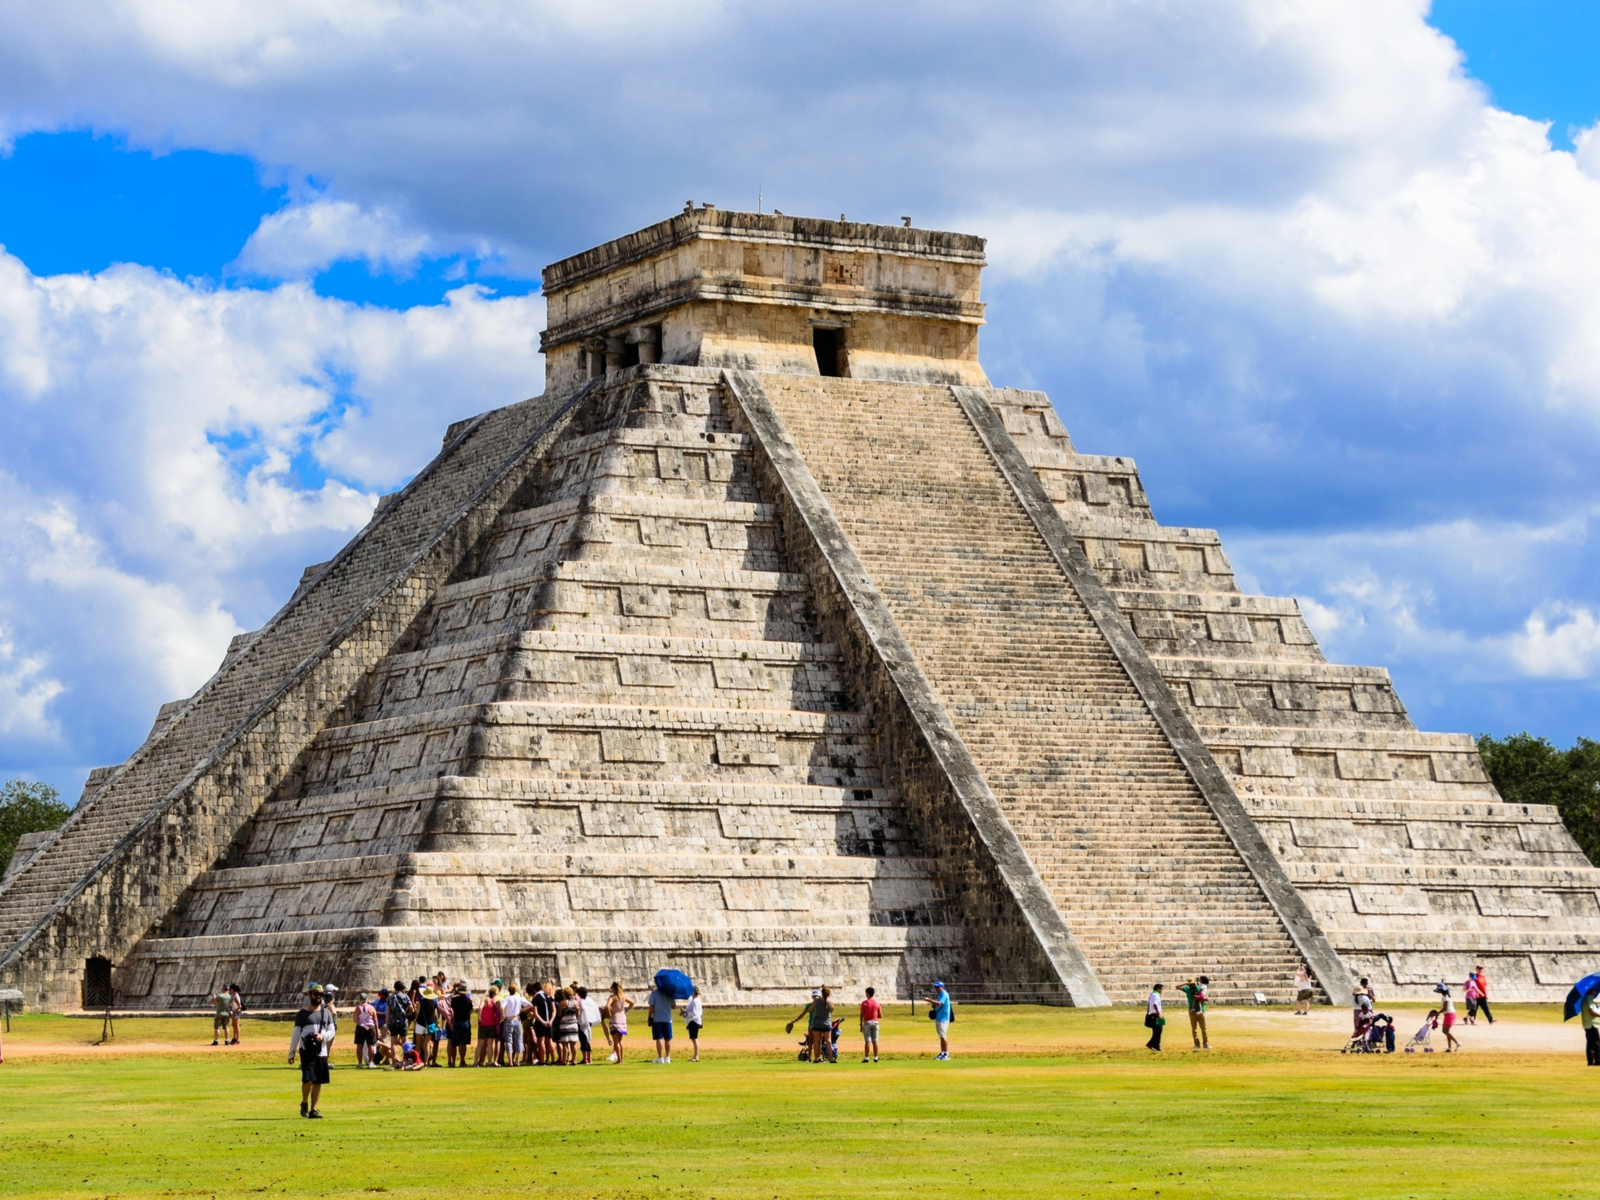 Multiple tourists taking pictures and having a great time at the foot of Chichen Itza Ruins, one of the best things to do in Cancun